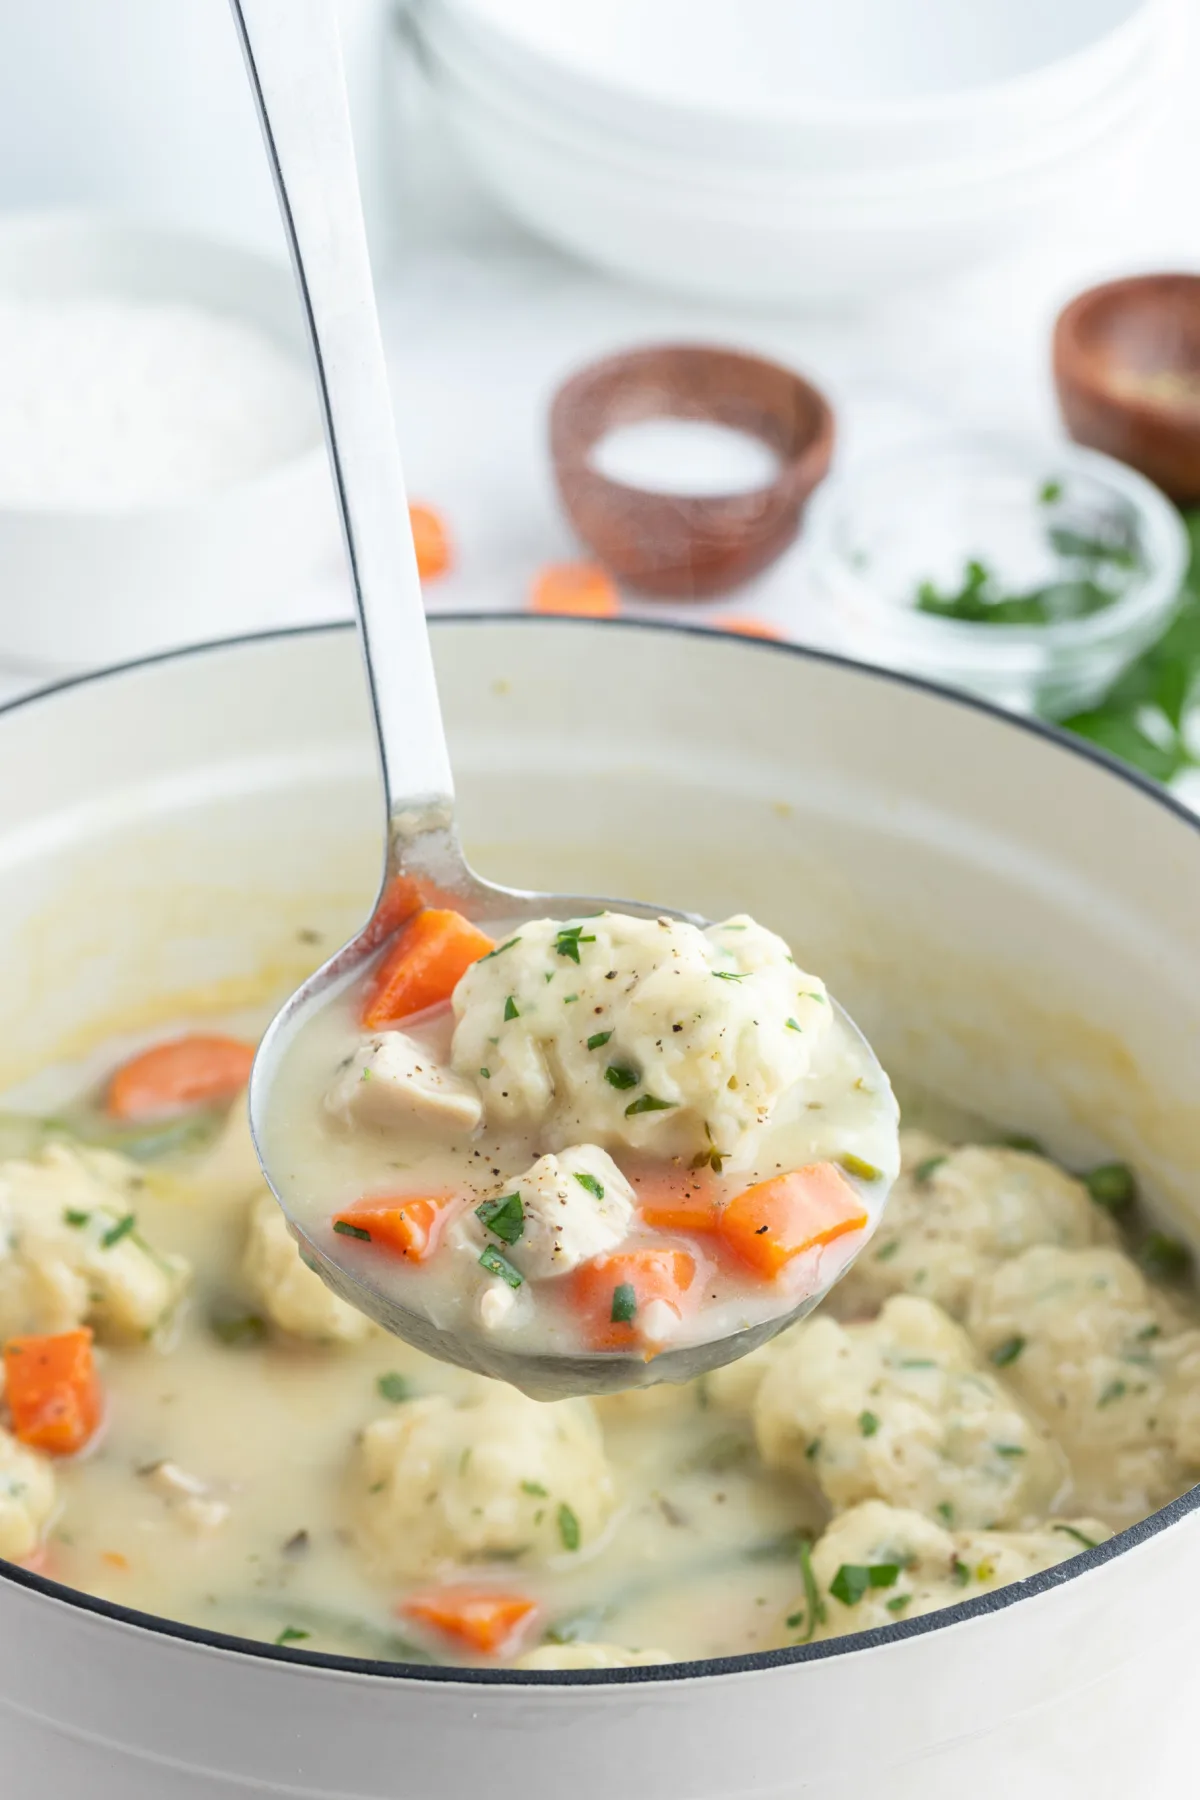 ladling out chicken and dumplings from pot